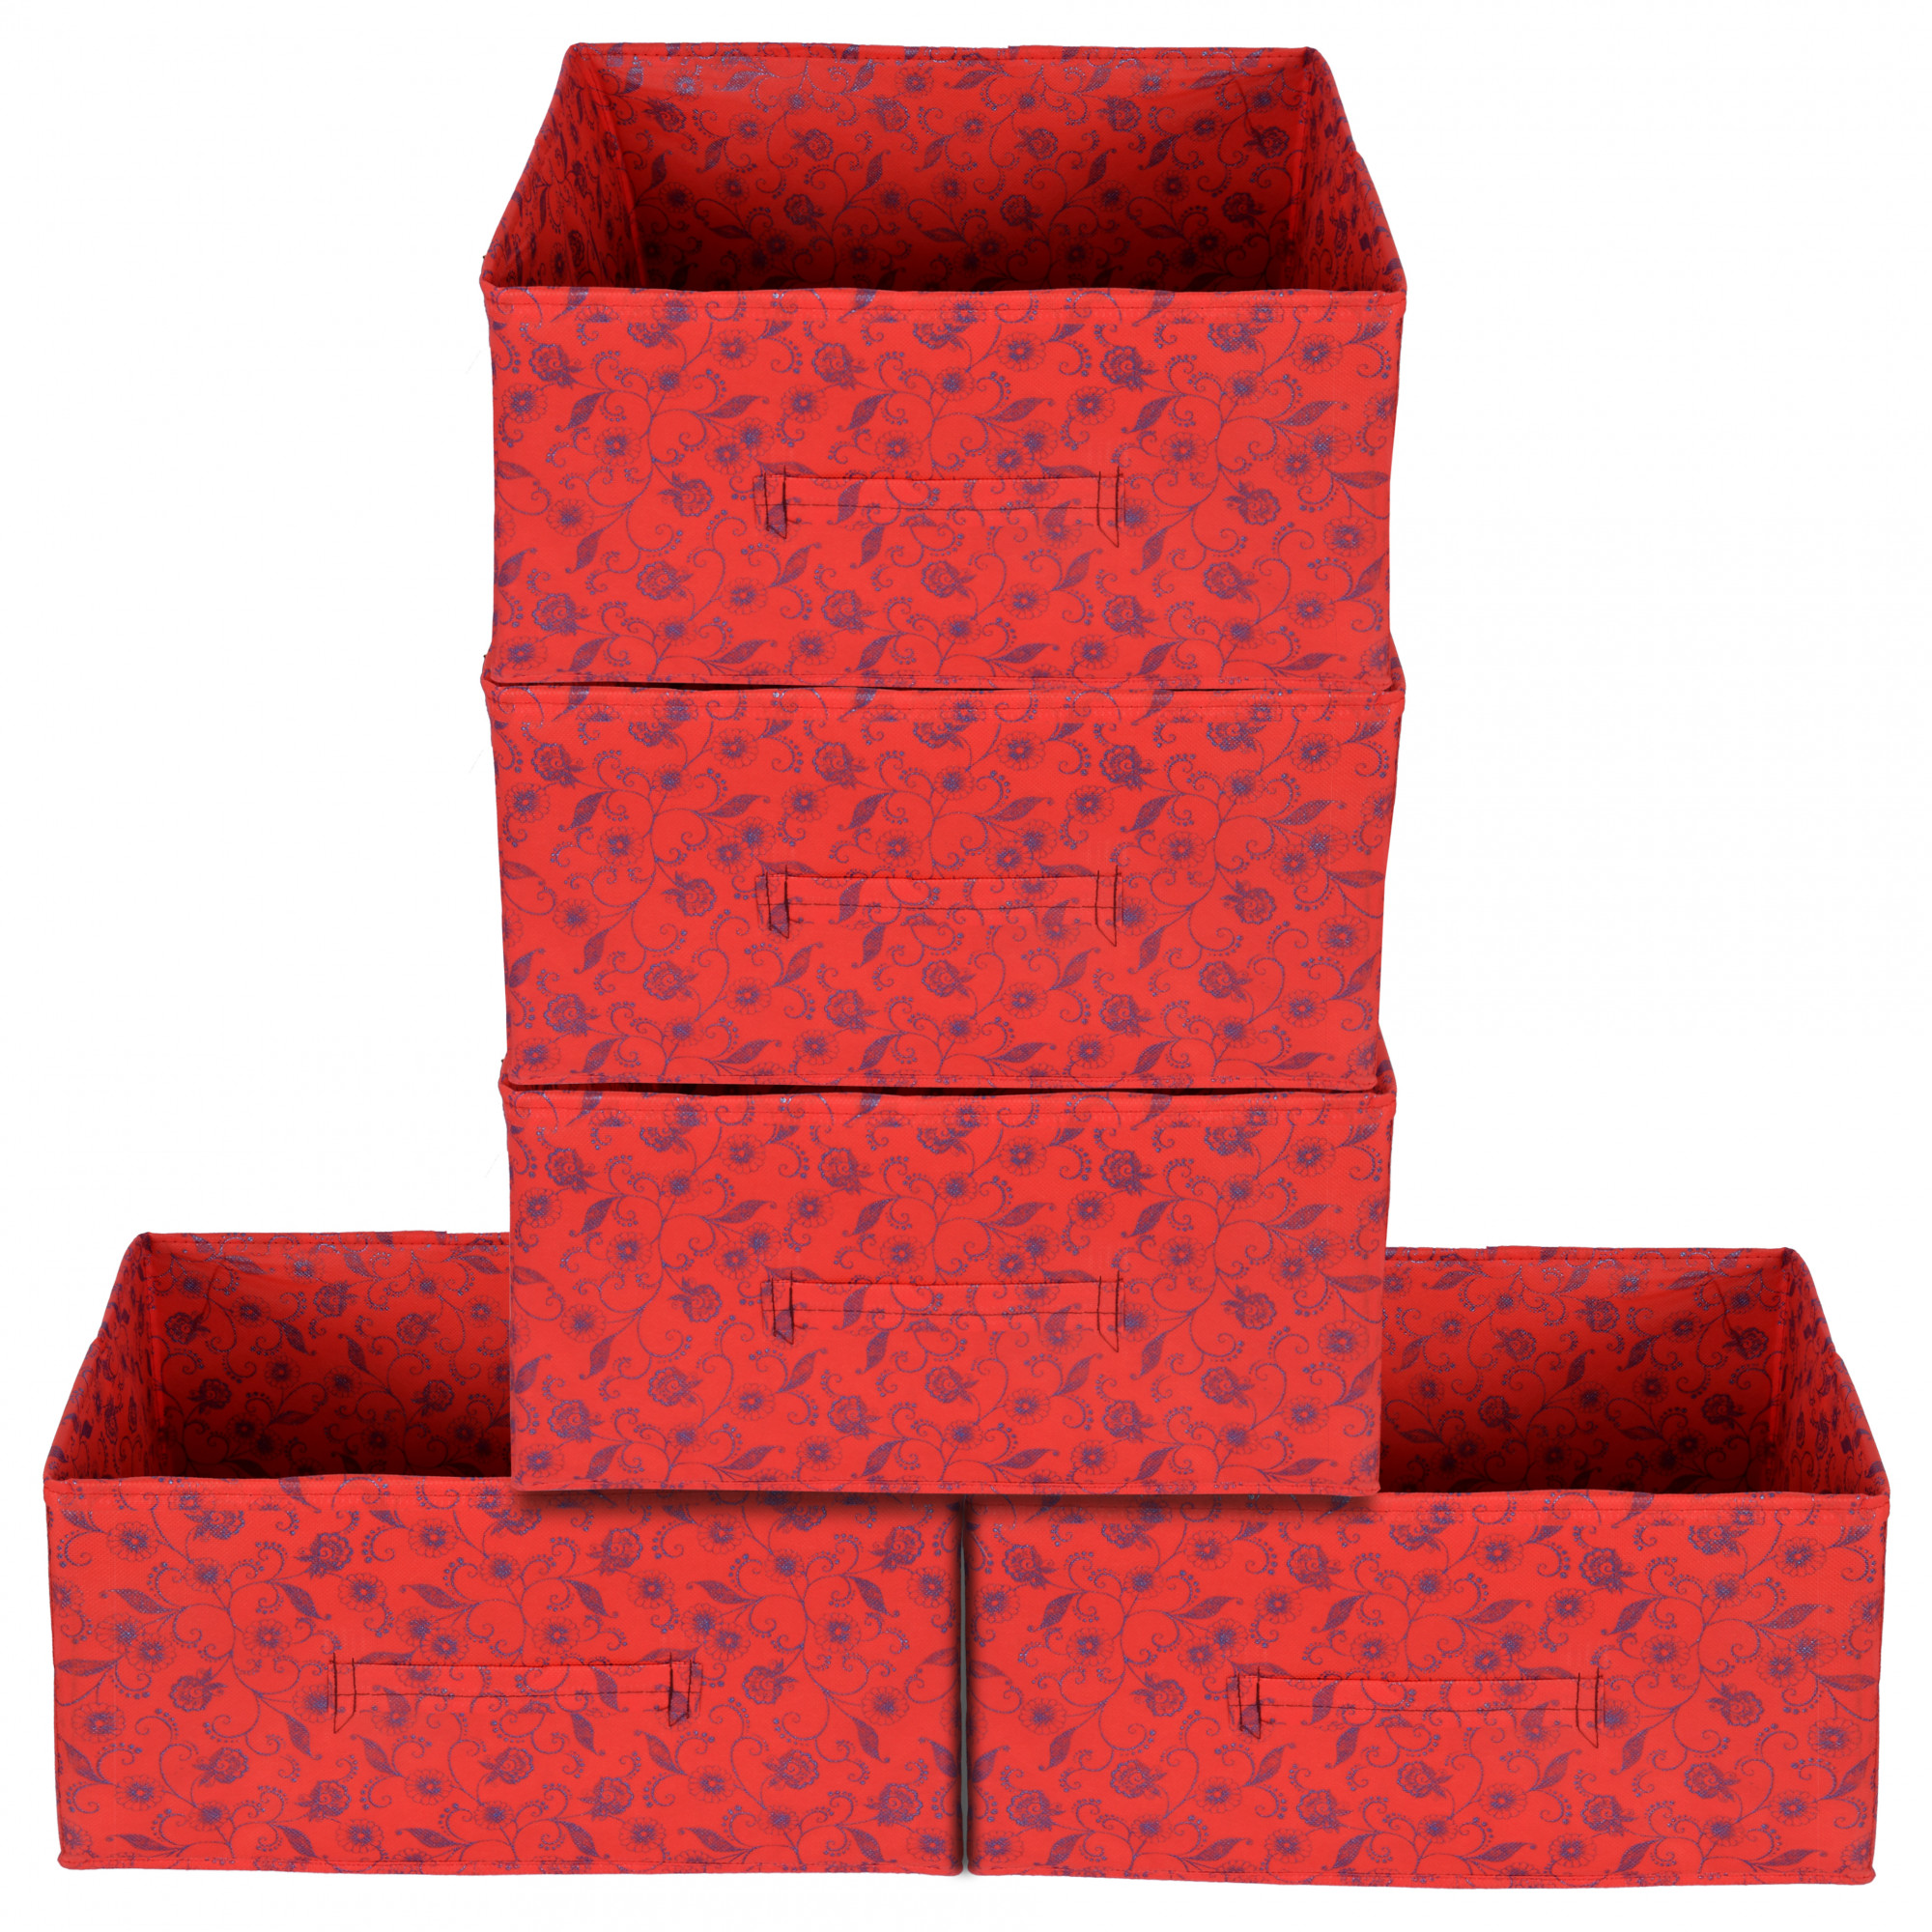 Kuber Industries Metalic Floral Print Non Woven Fabric Drawer Storage And Cloth Organizer Unit for Closet (Red)-KUBMART1180